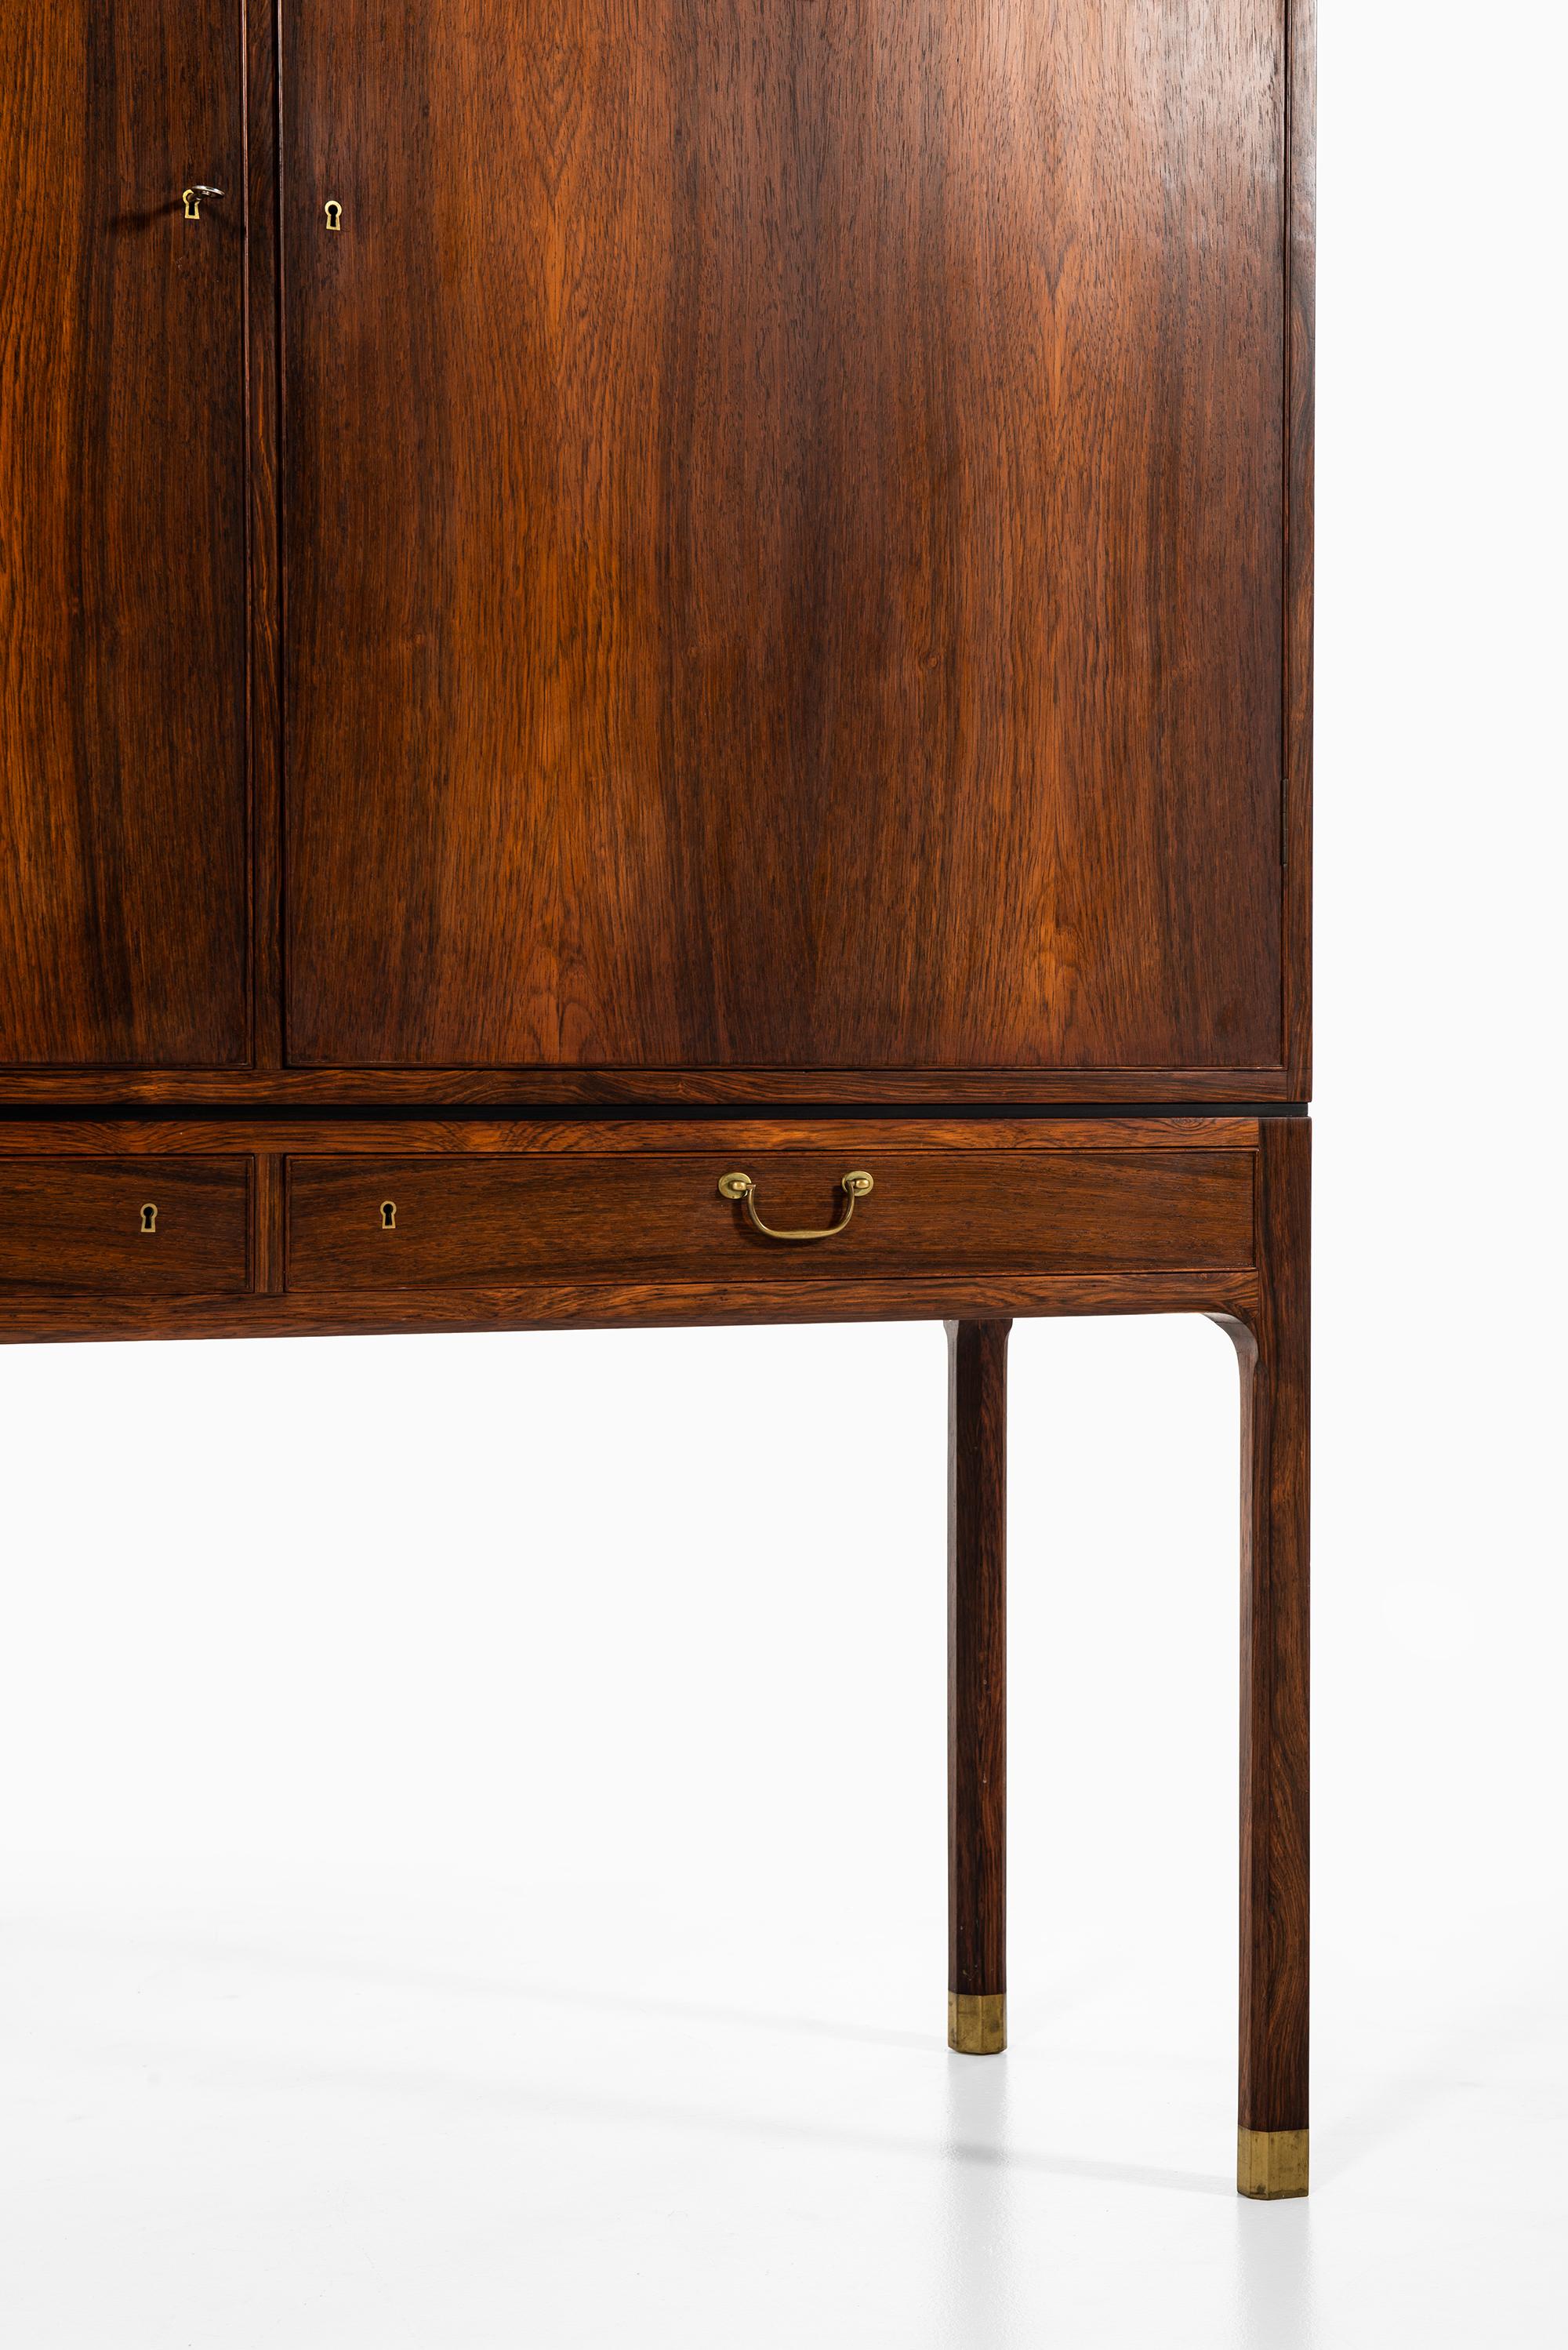 Very rare cabinet in rosewood and brass designed by Ole Wanscher. Produced by cabinetmaker A.J Iversen in Denmark.